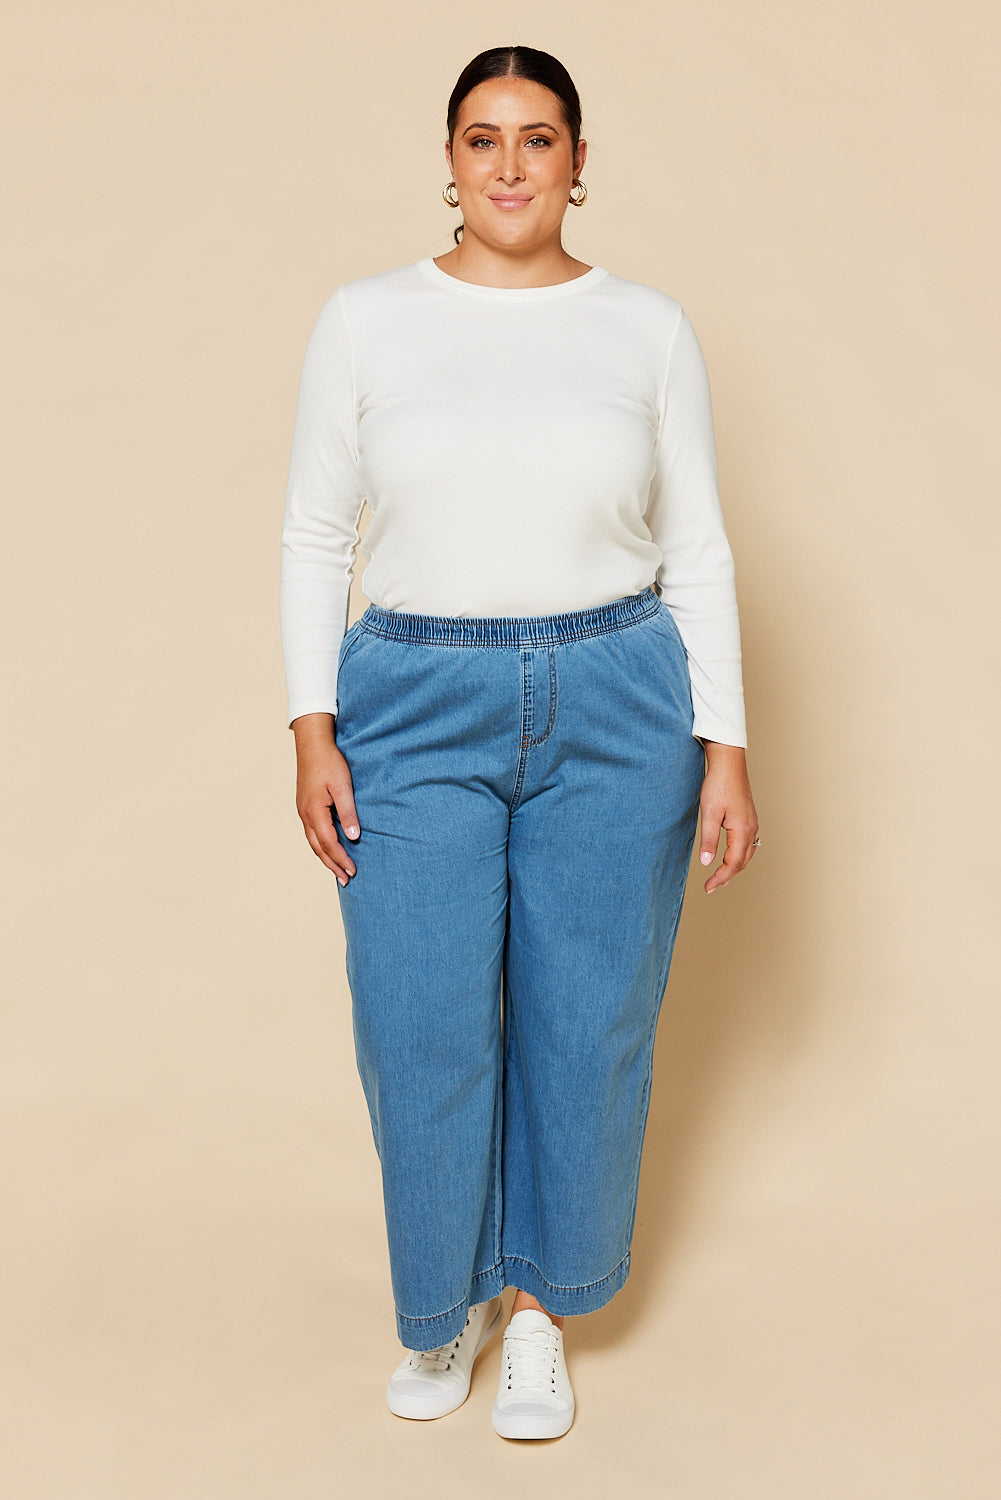 Breezy Chambray Cropped Pant in Light Wash